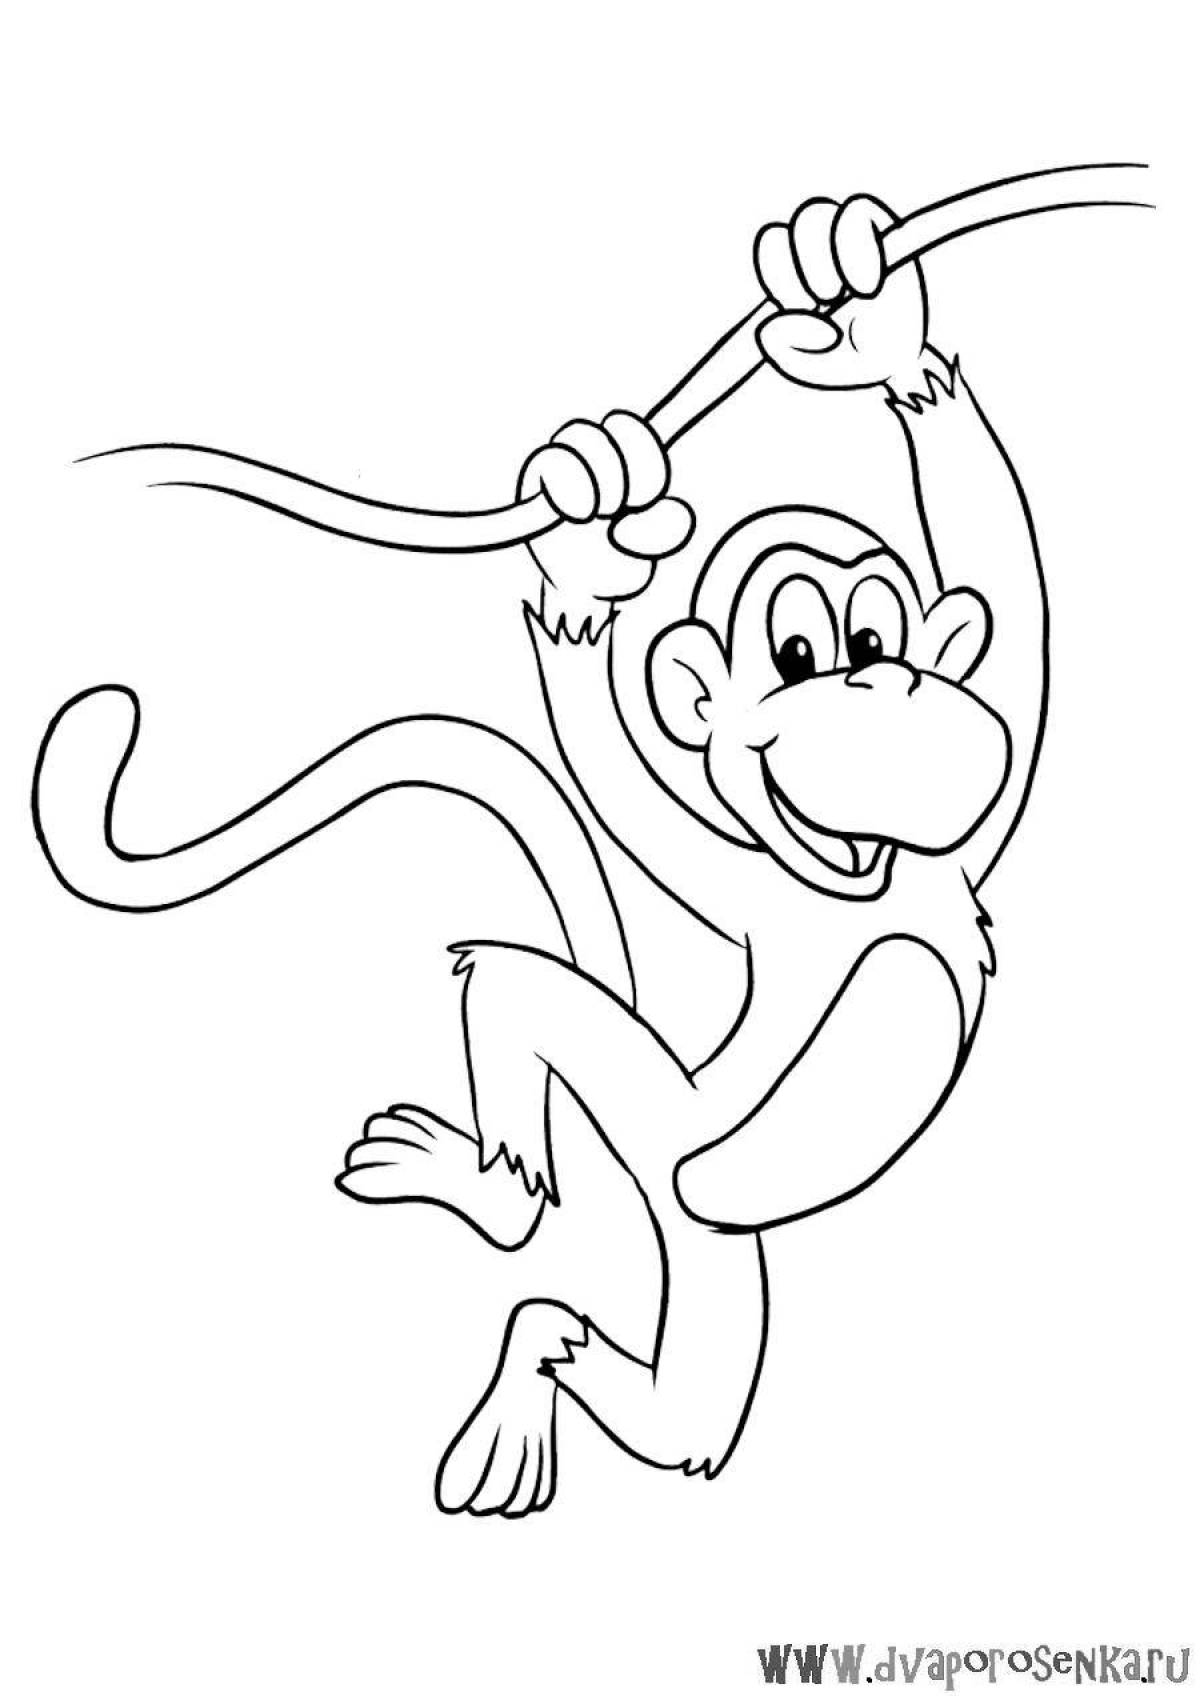 Grinning monkey coloring book